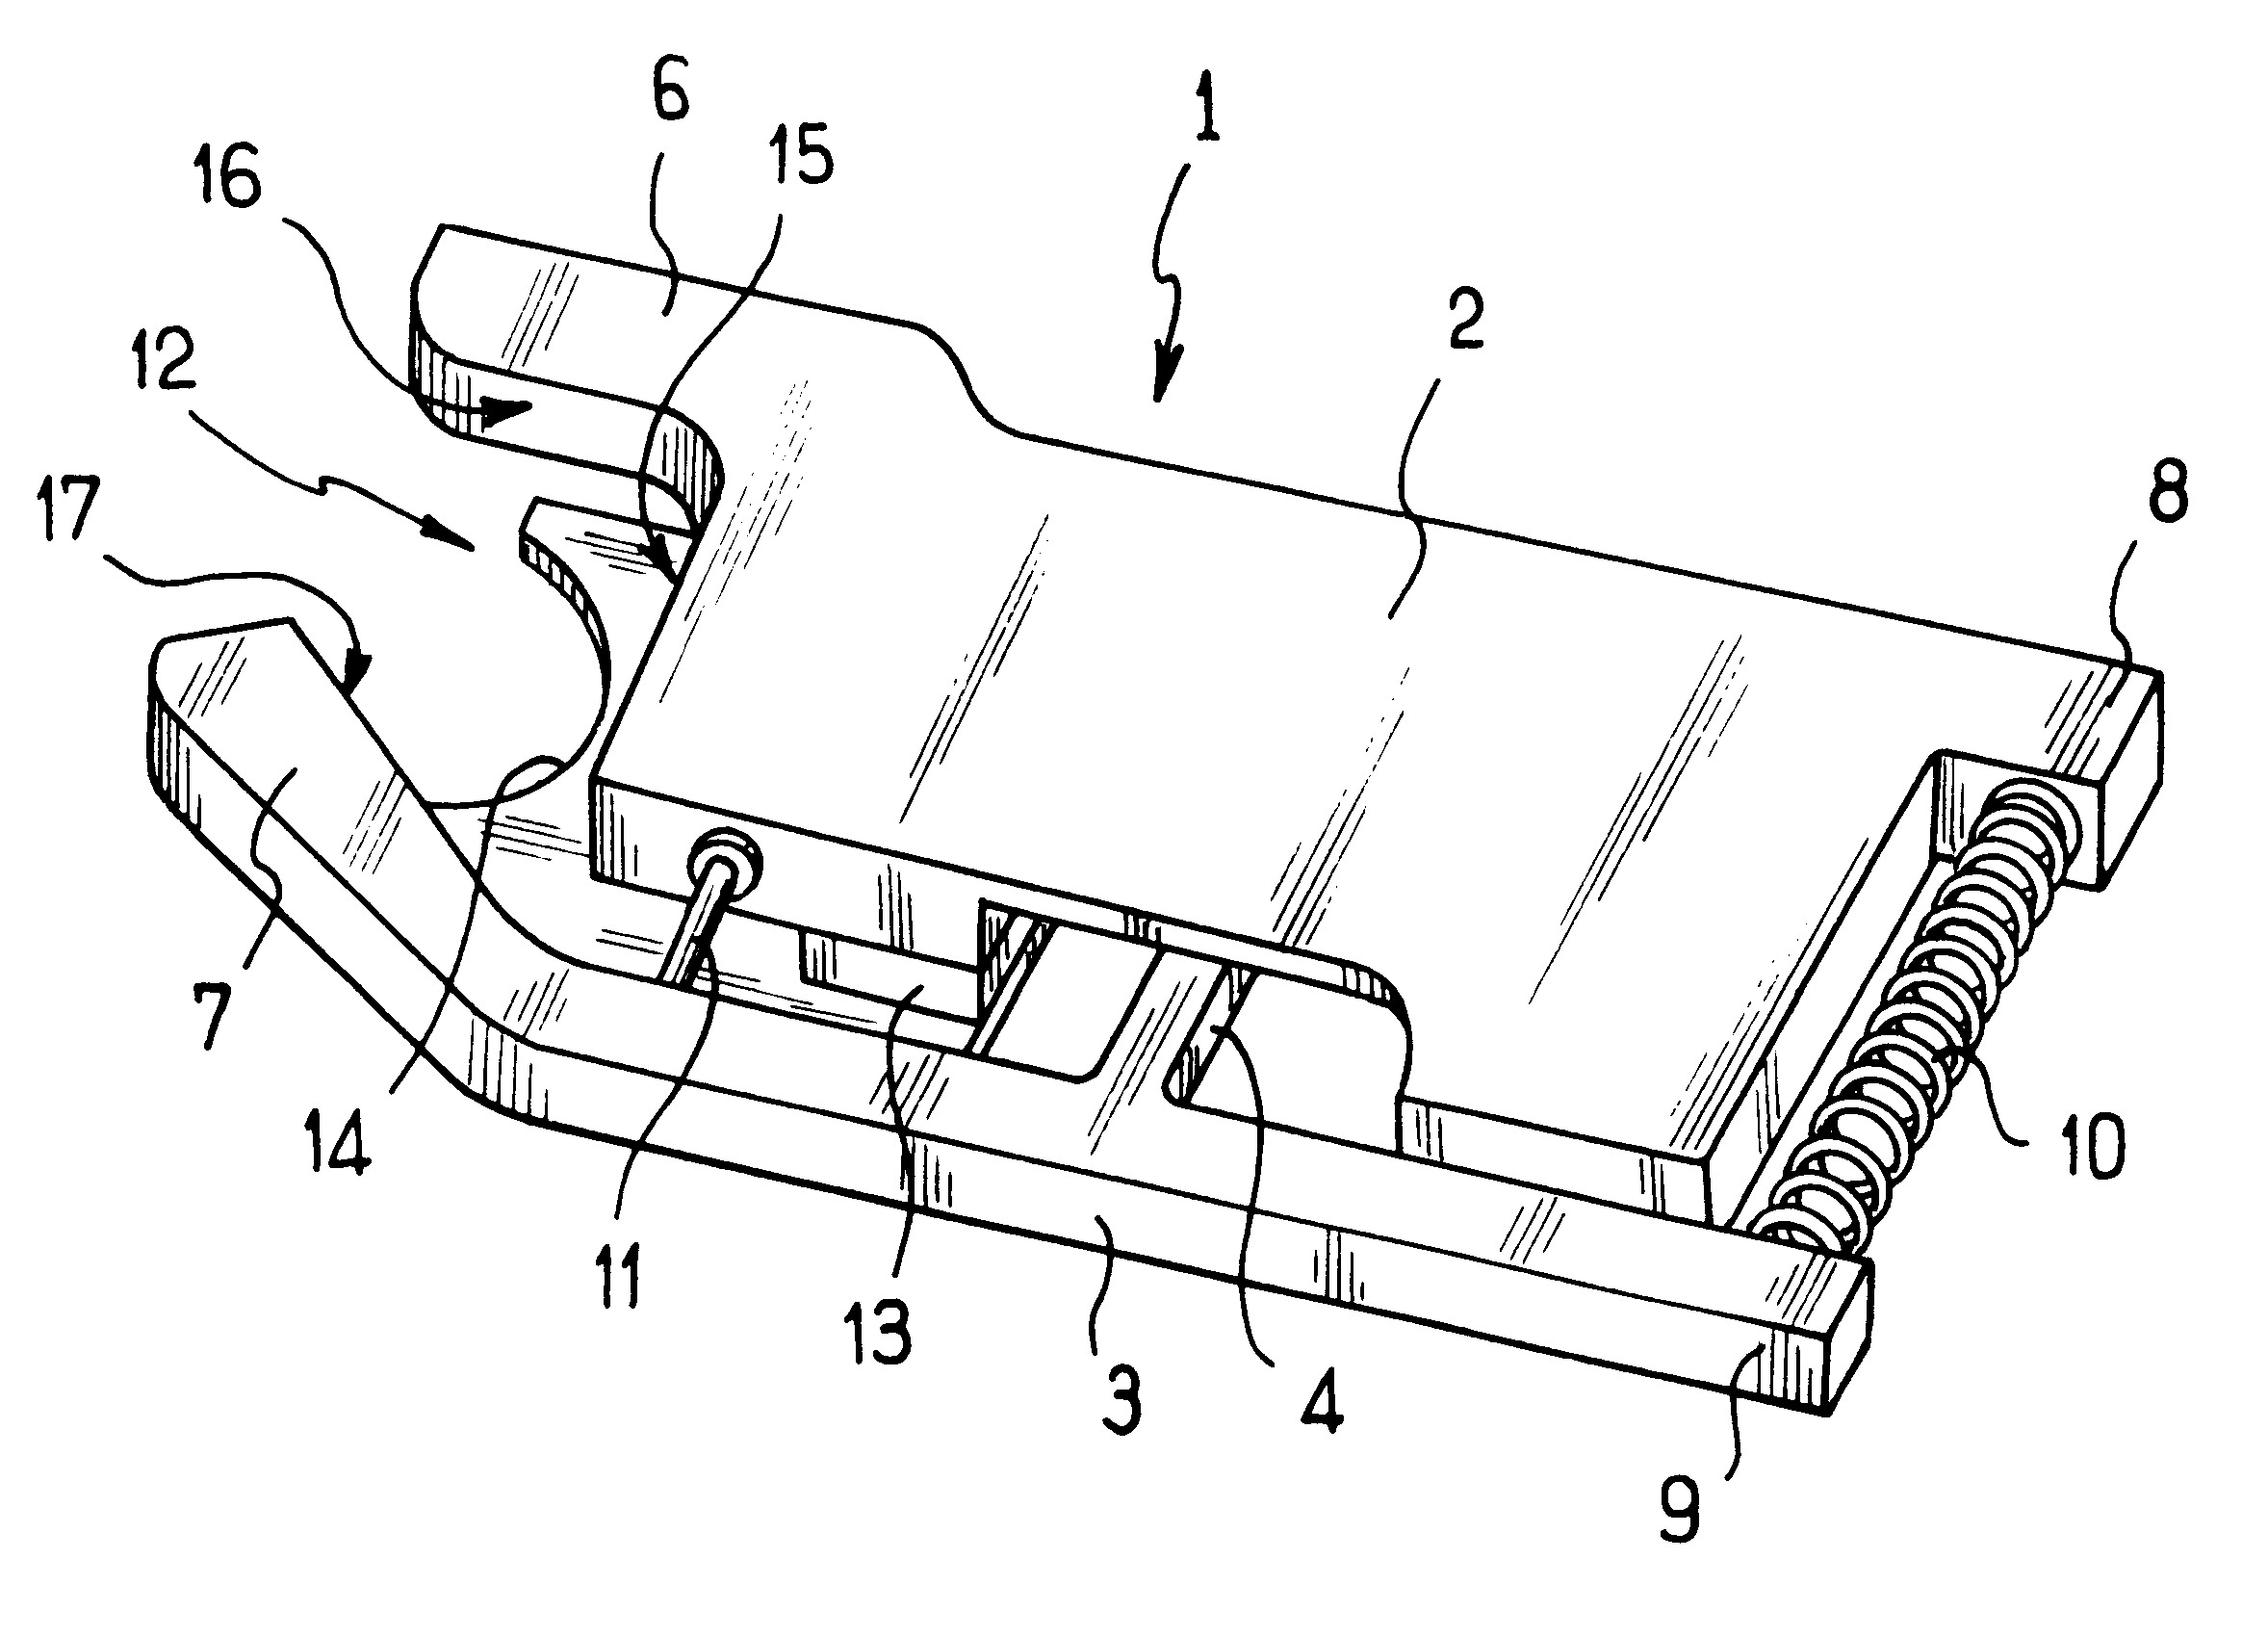 Device for supporting a receptacle in a cantilevered-out position